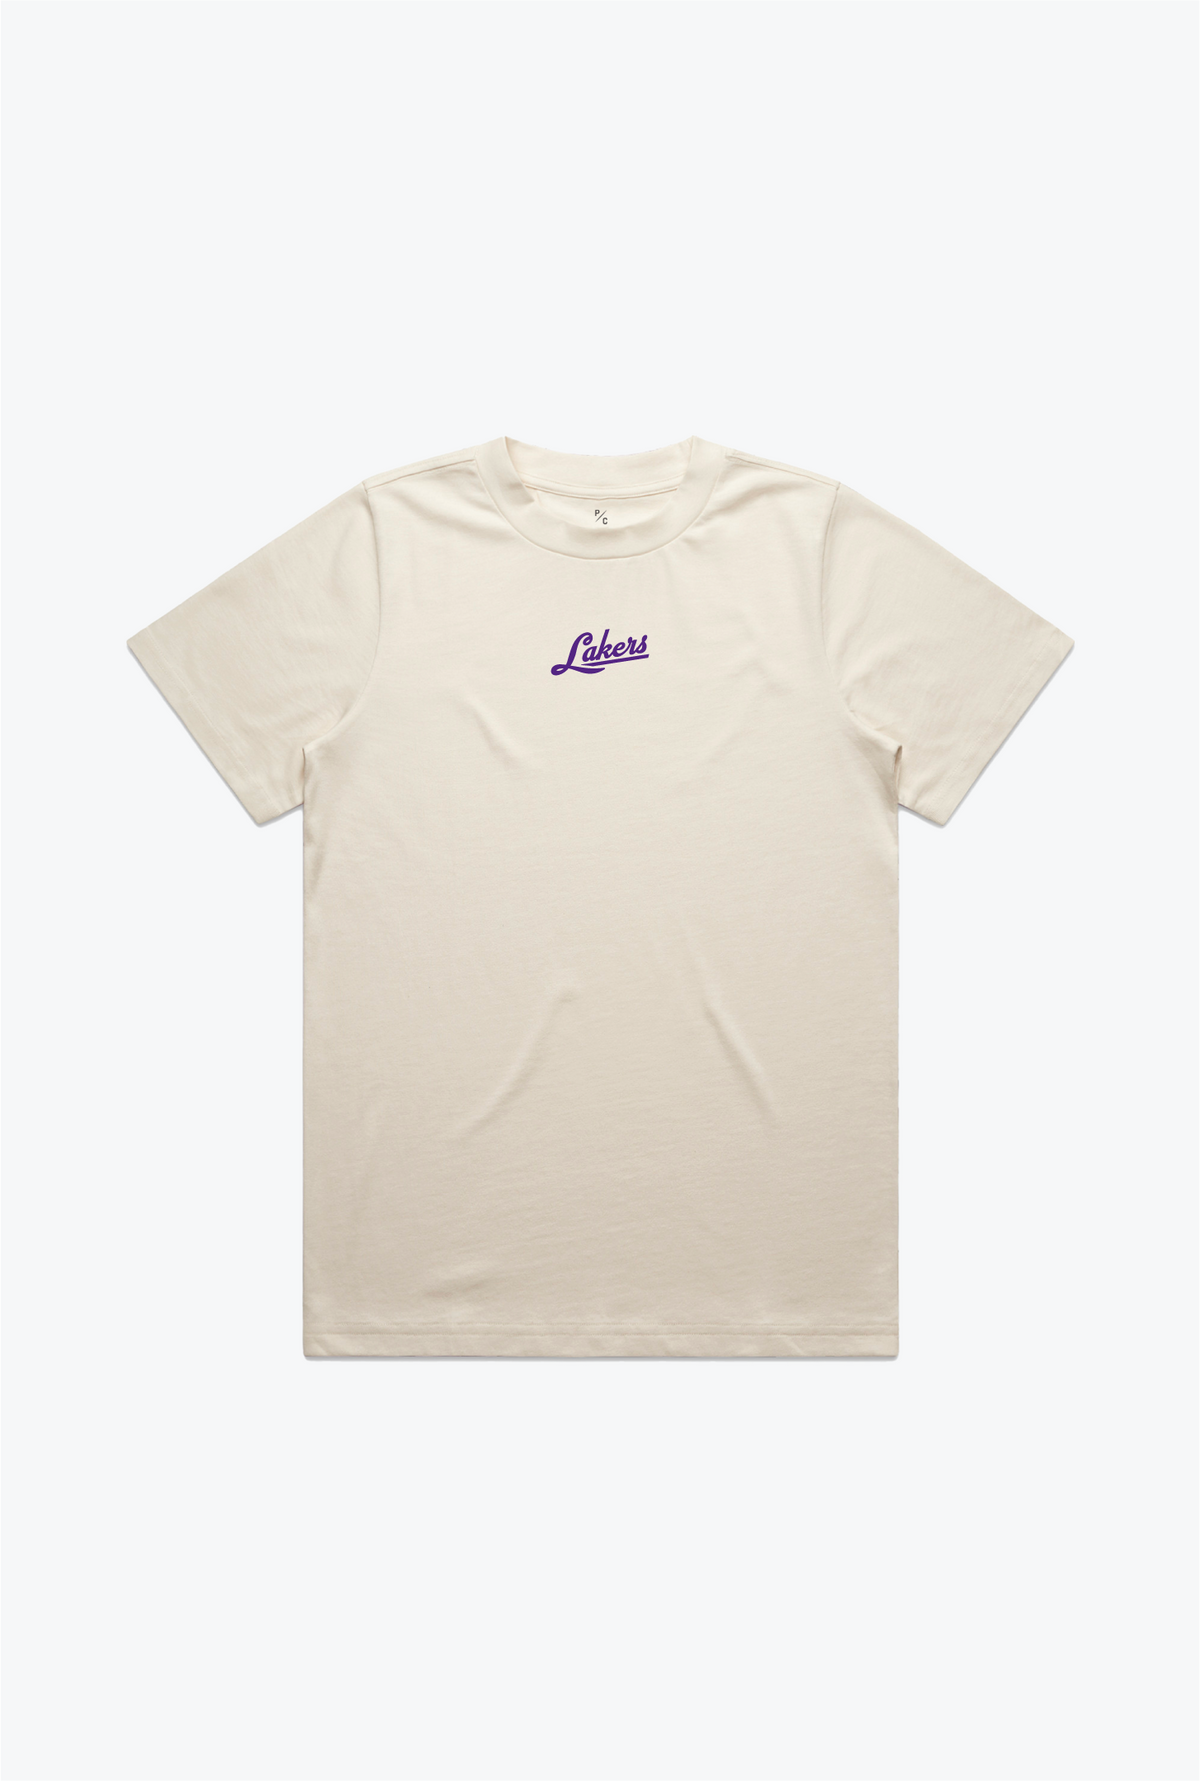 Los Angeles Lakers Women's Heavyweight T-Shirt - Natural